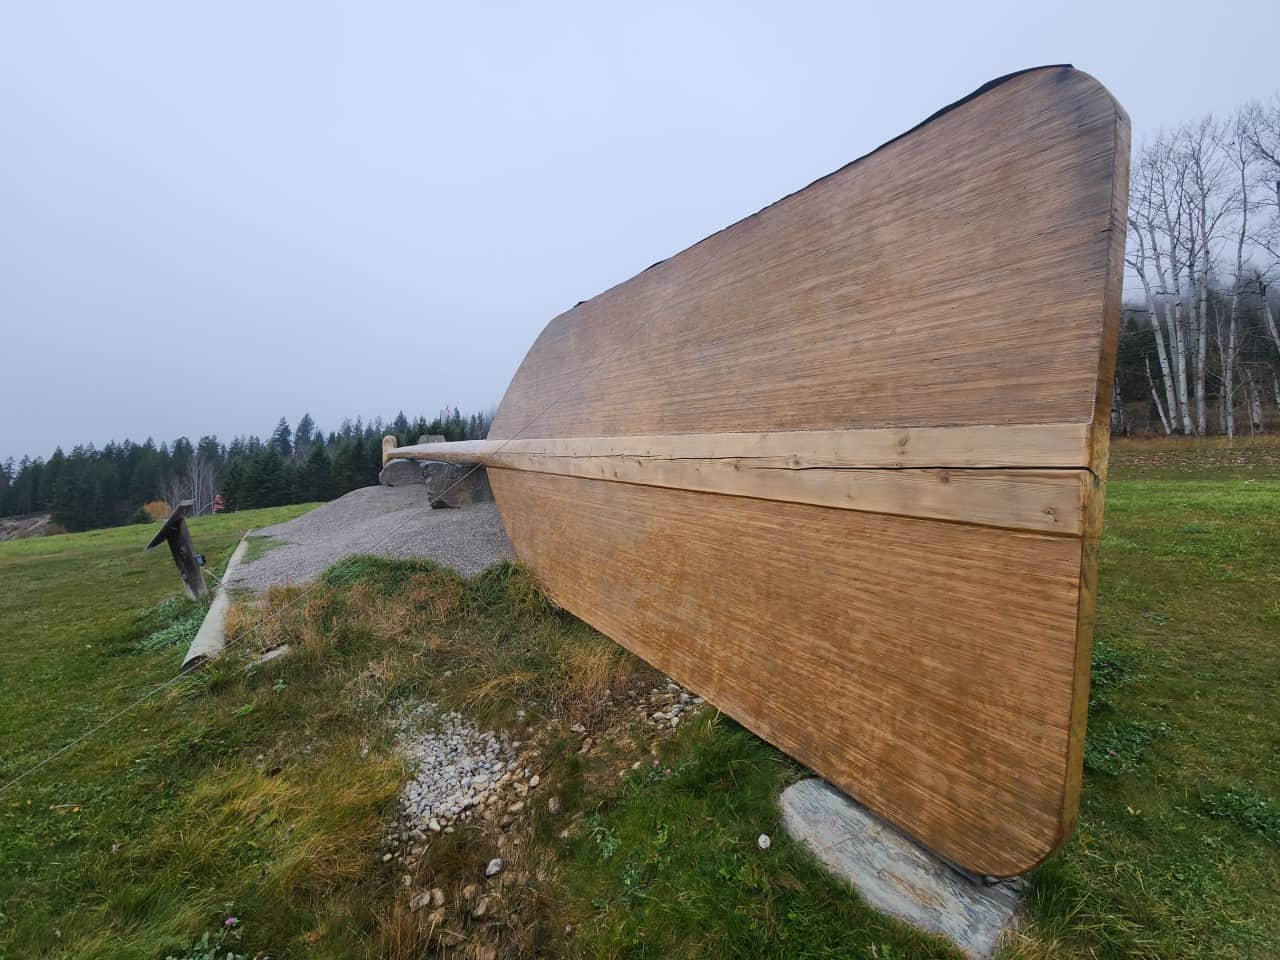 Just 20 minutes south of Golden British Columbia Canada you can take a roadtrip to the World's Largest Paddle. A fun family friendly roadside attraction near Golden, B.C.